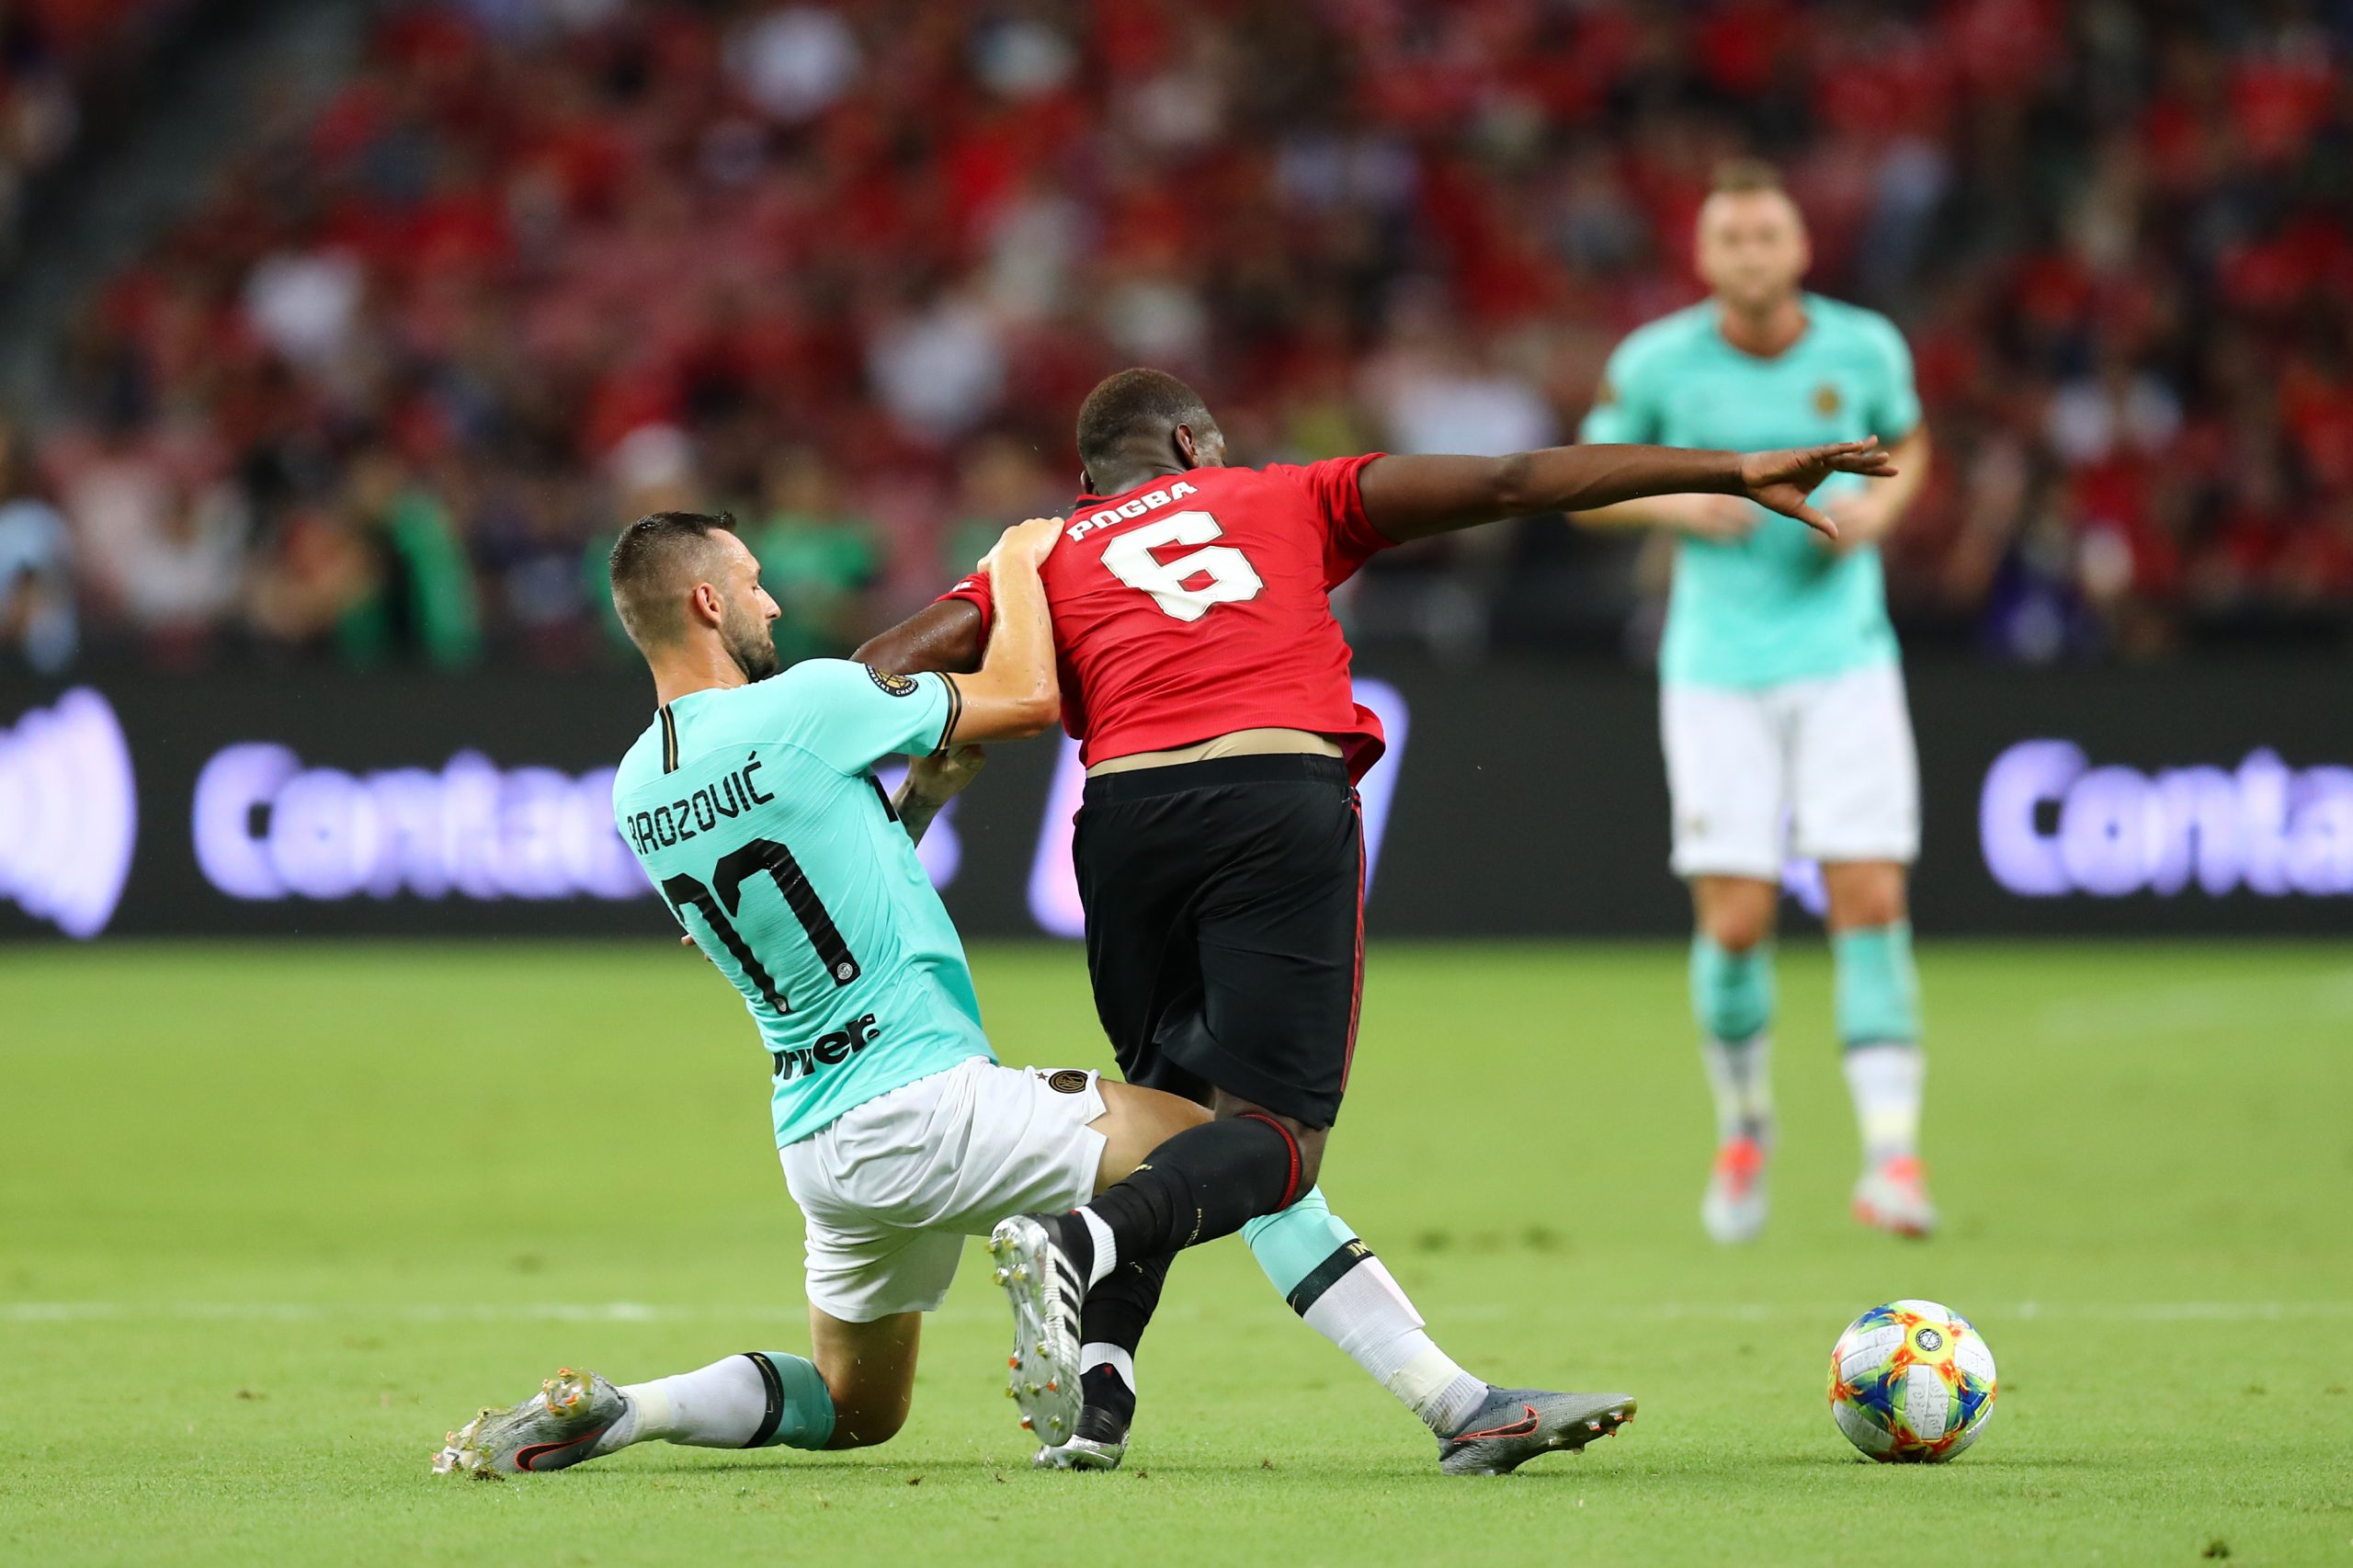 Paul Pogba of Manchester United and Marcelo Brozovic of Inter Milan compete for the ball during a friendly in 2019.